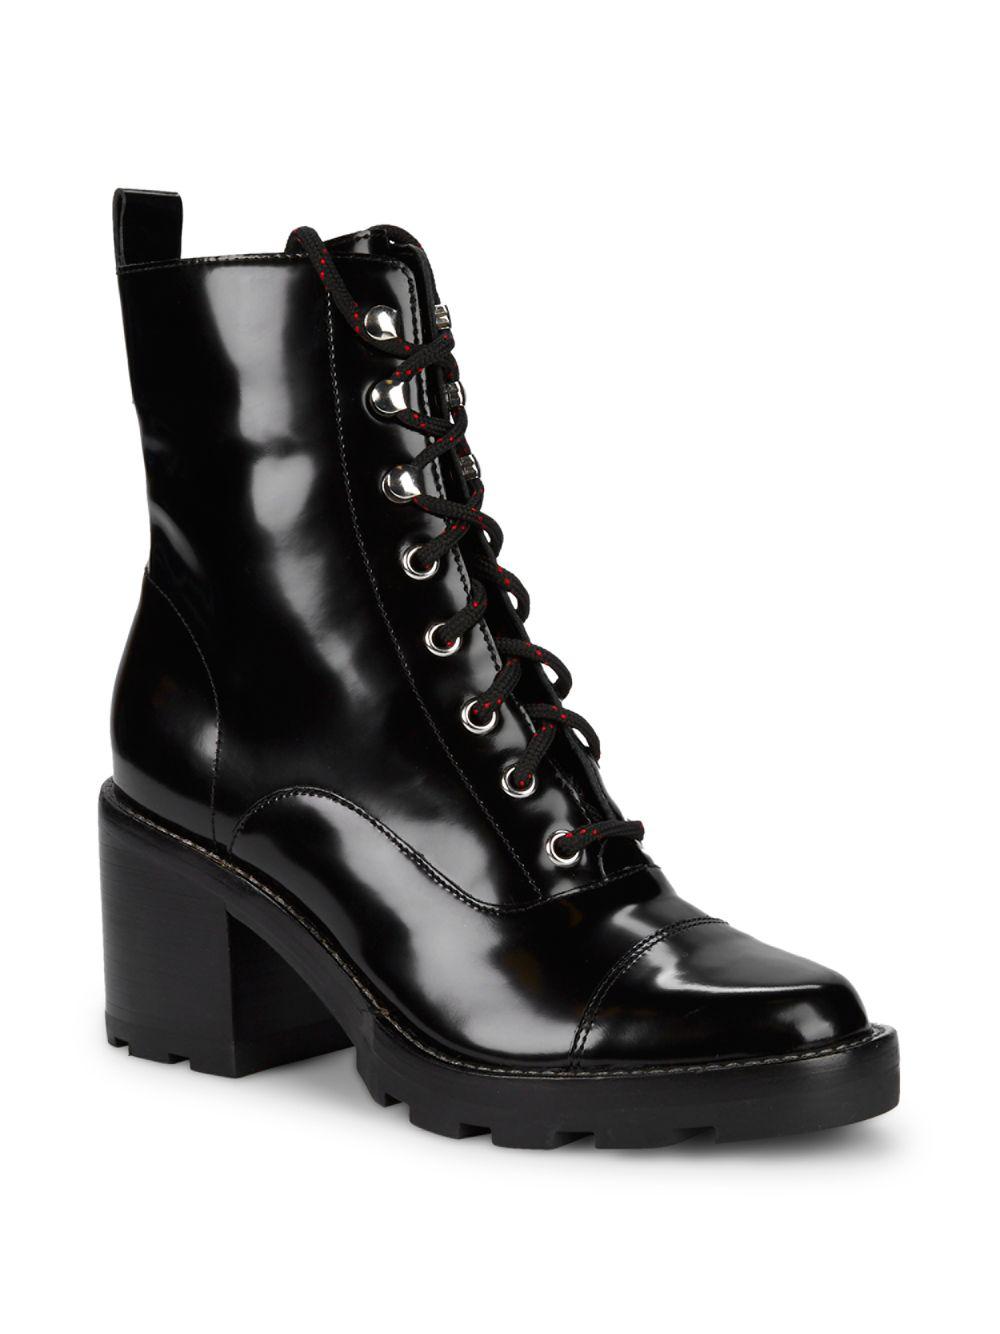 Marc Fisher Wanya Leather Combat Boots in Black Lyst